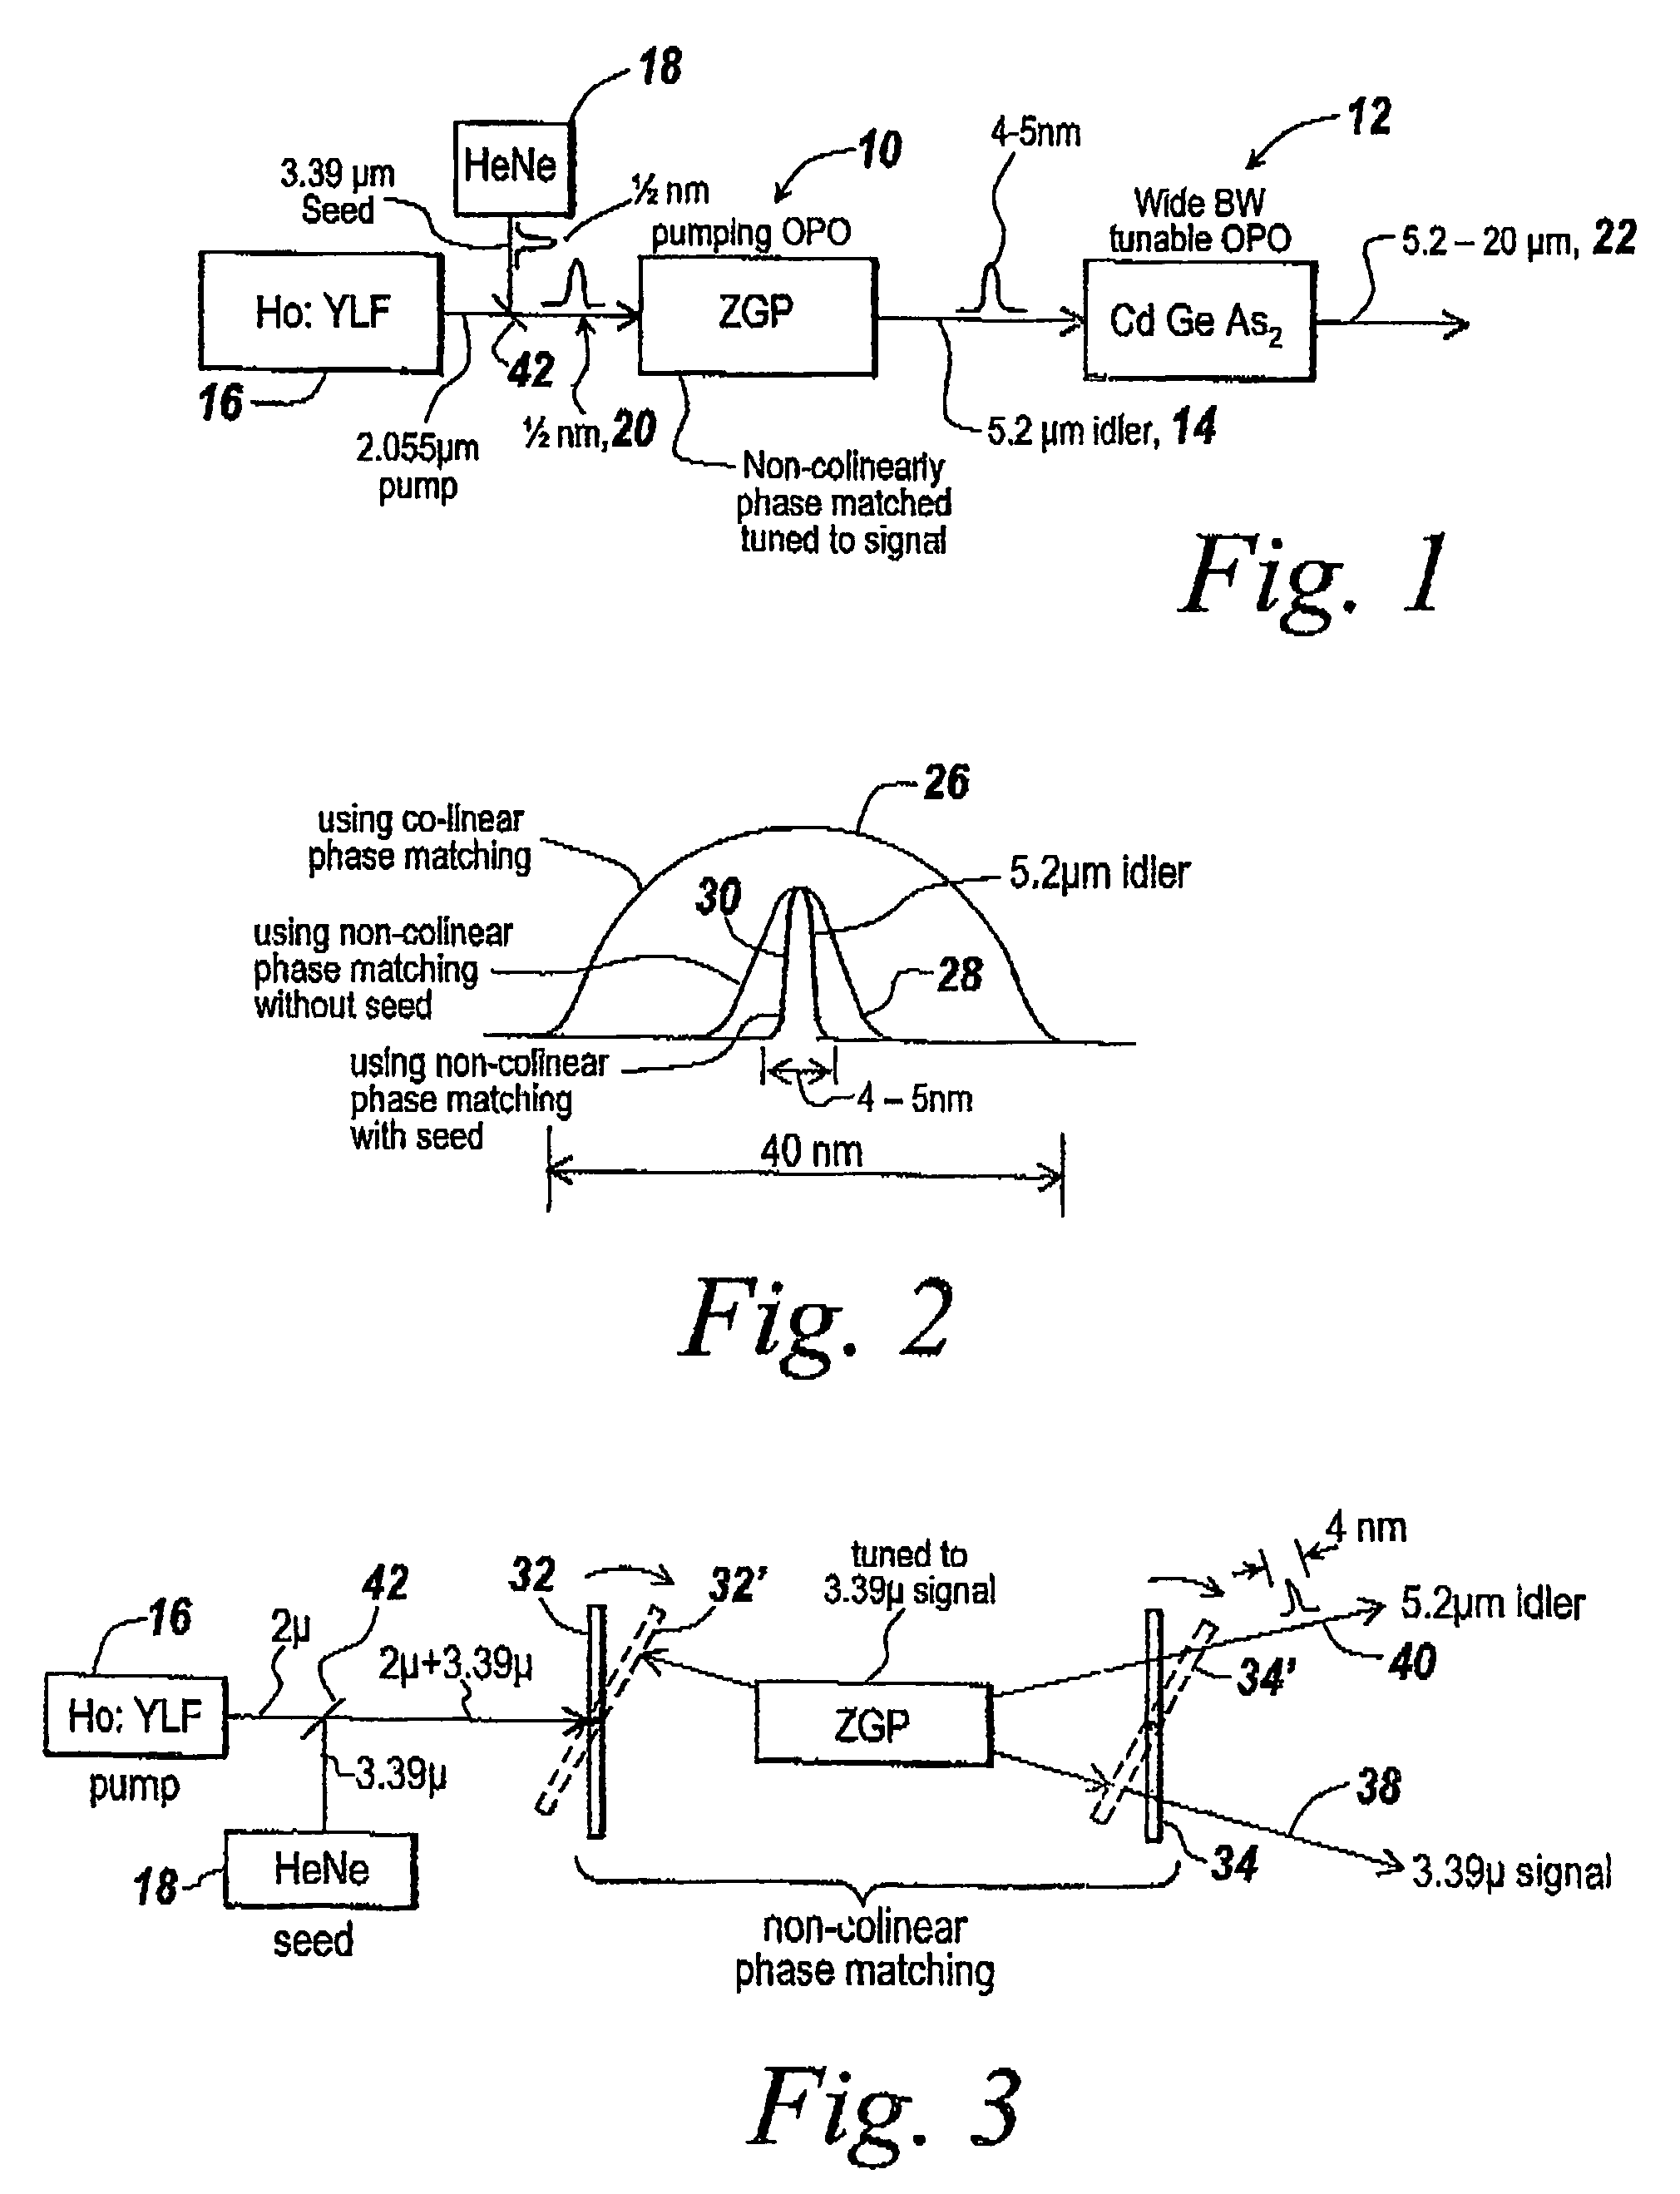 Method and apparatus for generating MID and long IR wavelength radiation